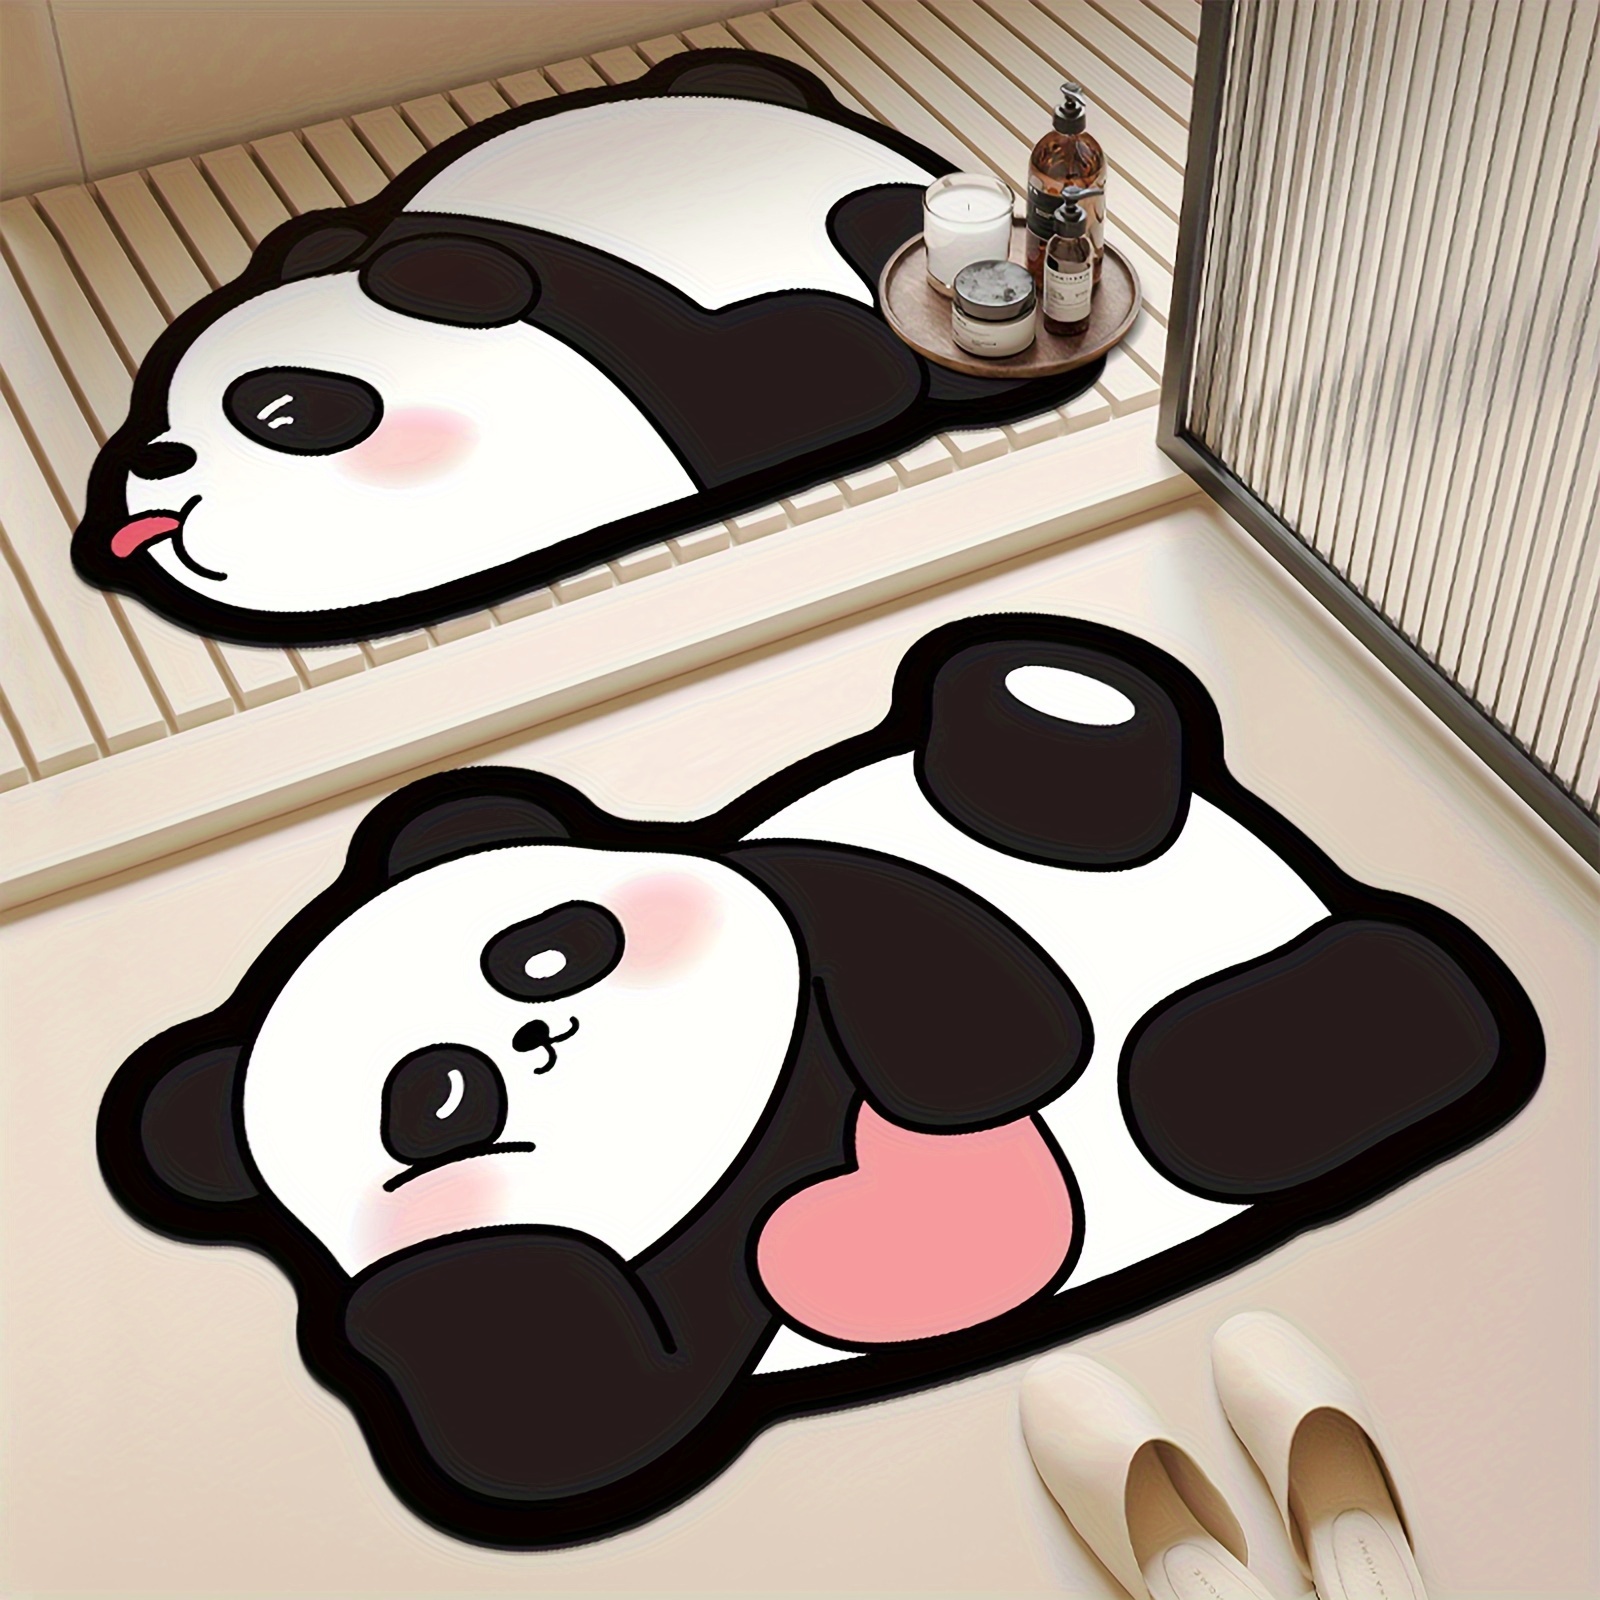 

Cute Panda Quick-dry Bath Mat - Non-slip, Soft Diatomaceous Earth Rug For Shower & Outdoor Use